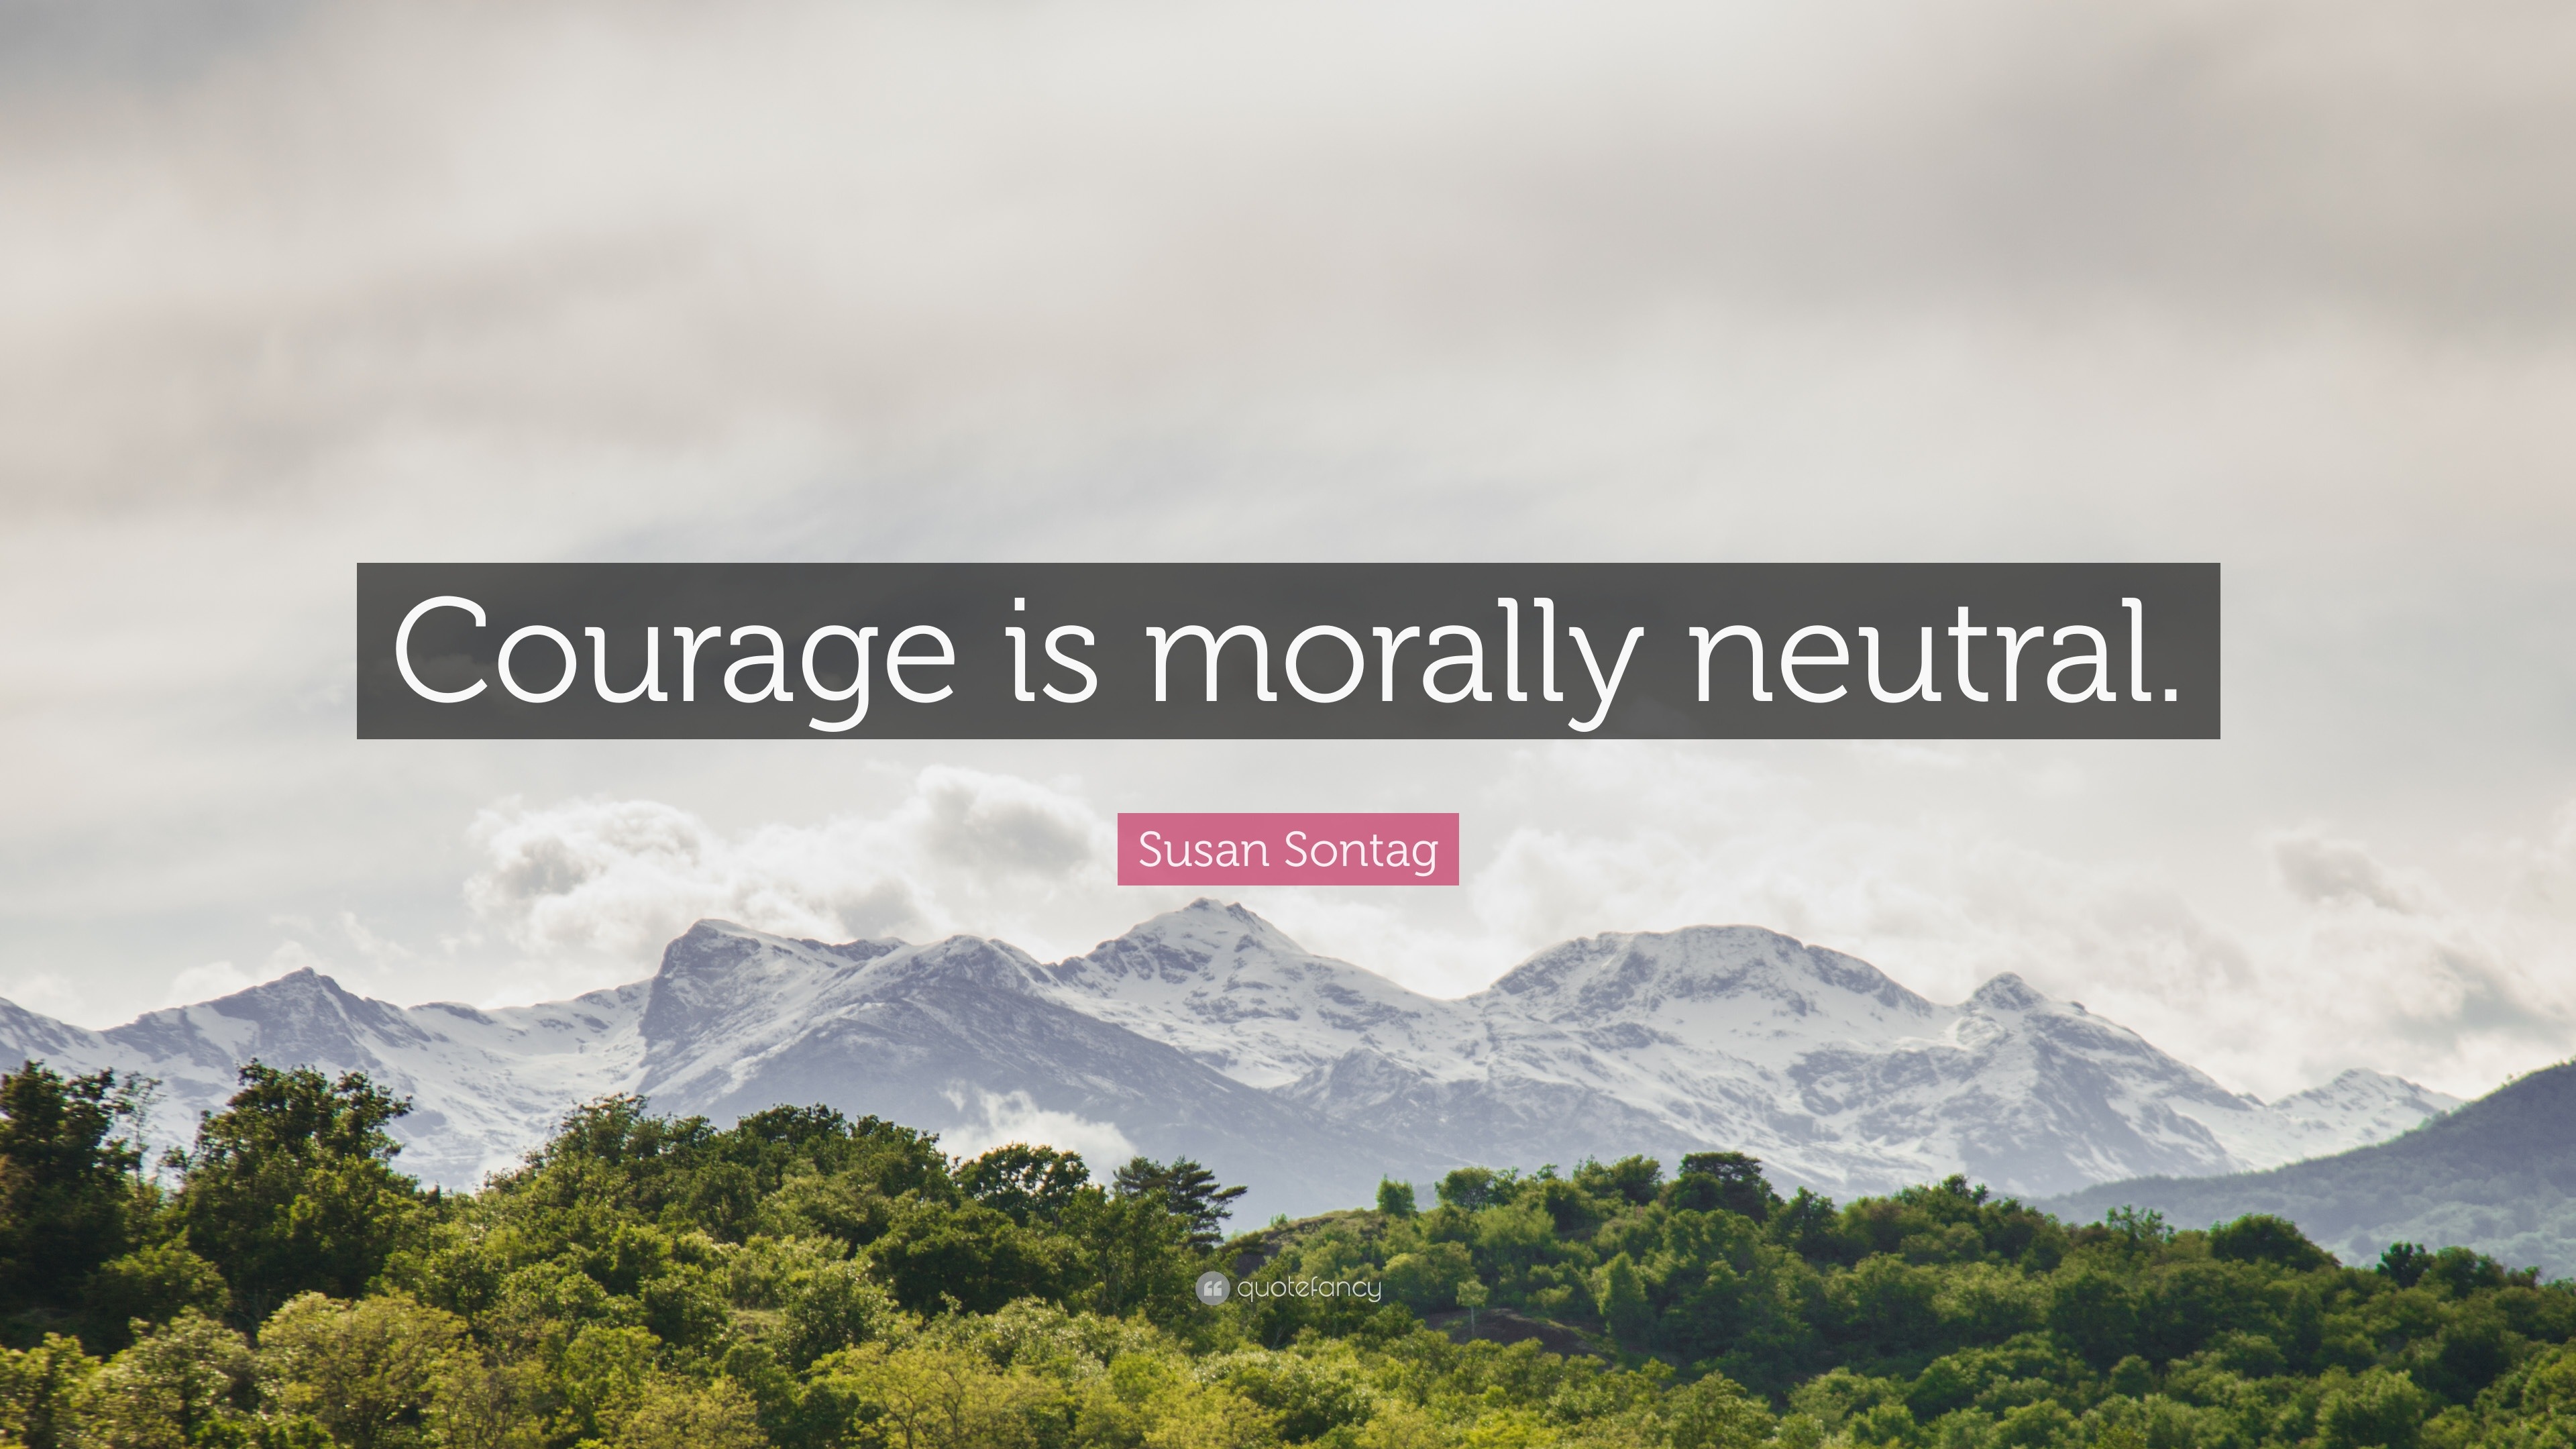 Susan Sontag Quote: “Courage is morally neutral.”